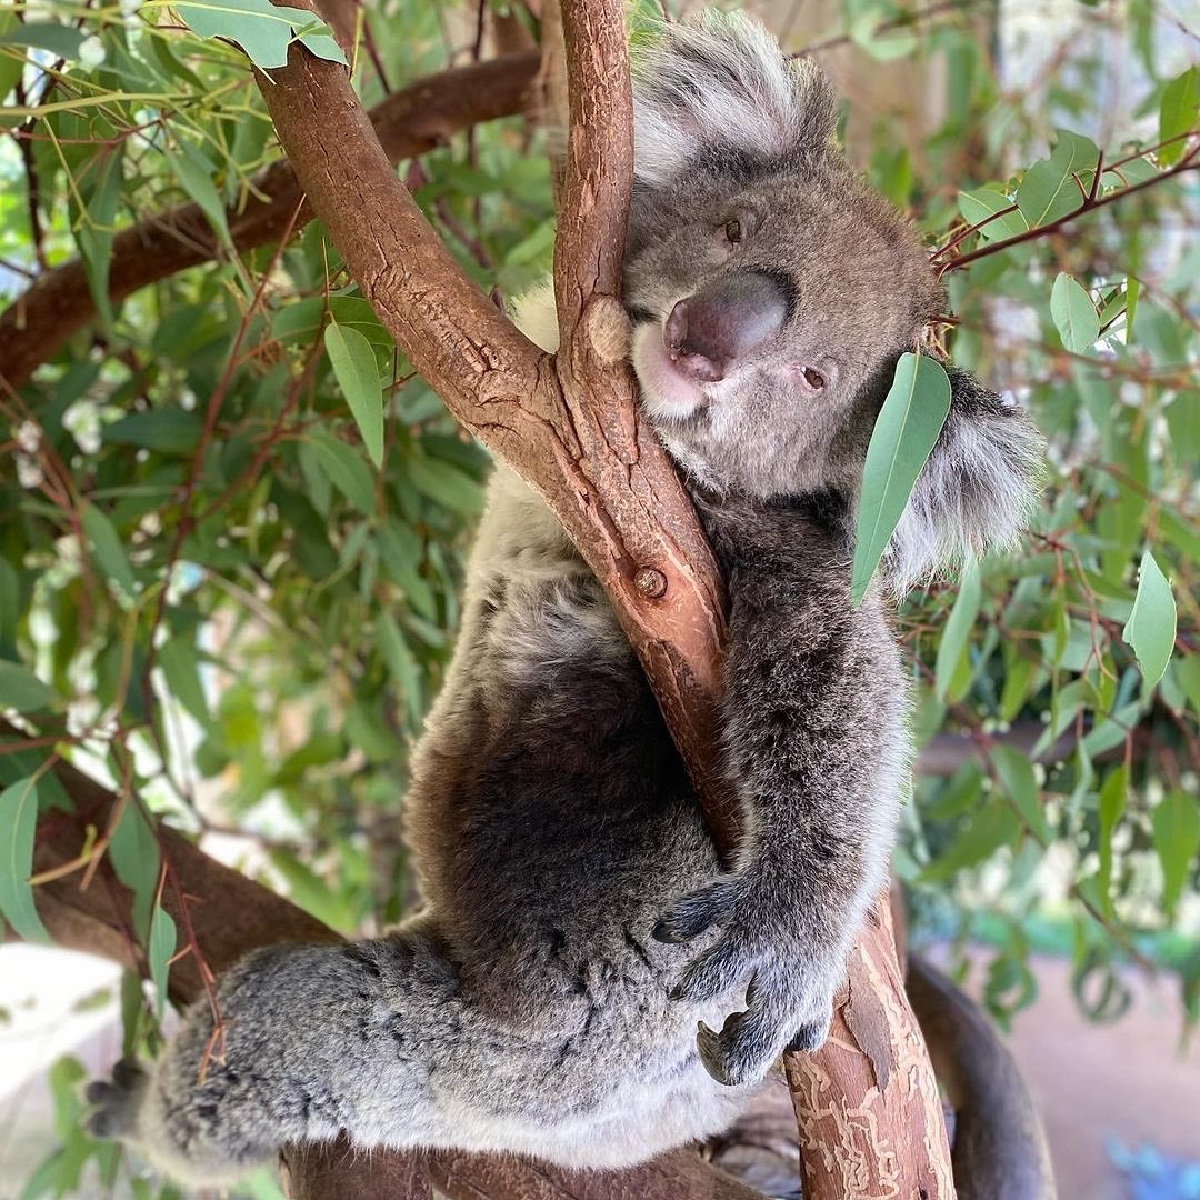 Eat, snooze, pose, repeat...😴 🔁

Koalas can sleep up to 20-hours a day, so it's pretty common to catch them mid-nap when you visit #CavershamWildlifePark in Boorloo (@DestPERTH).

#seeaustralia #thisiswa #seeperth #holidayherethisyear